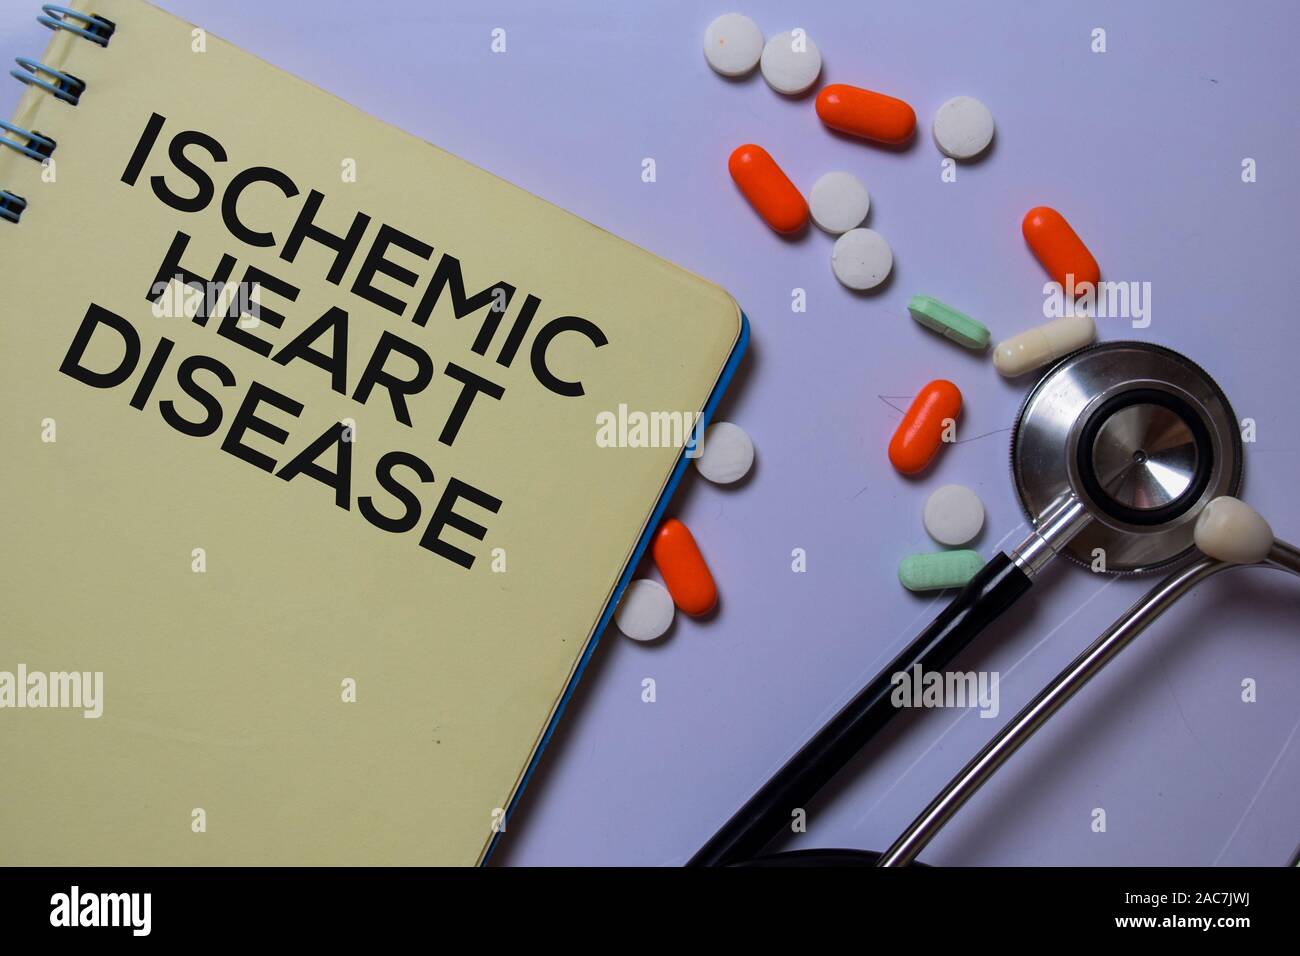 Ischemic Heart Disease write on a book isolated on white board background. Medical Concept Stock Photo